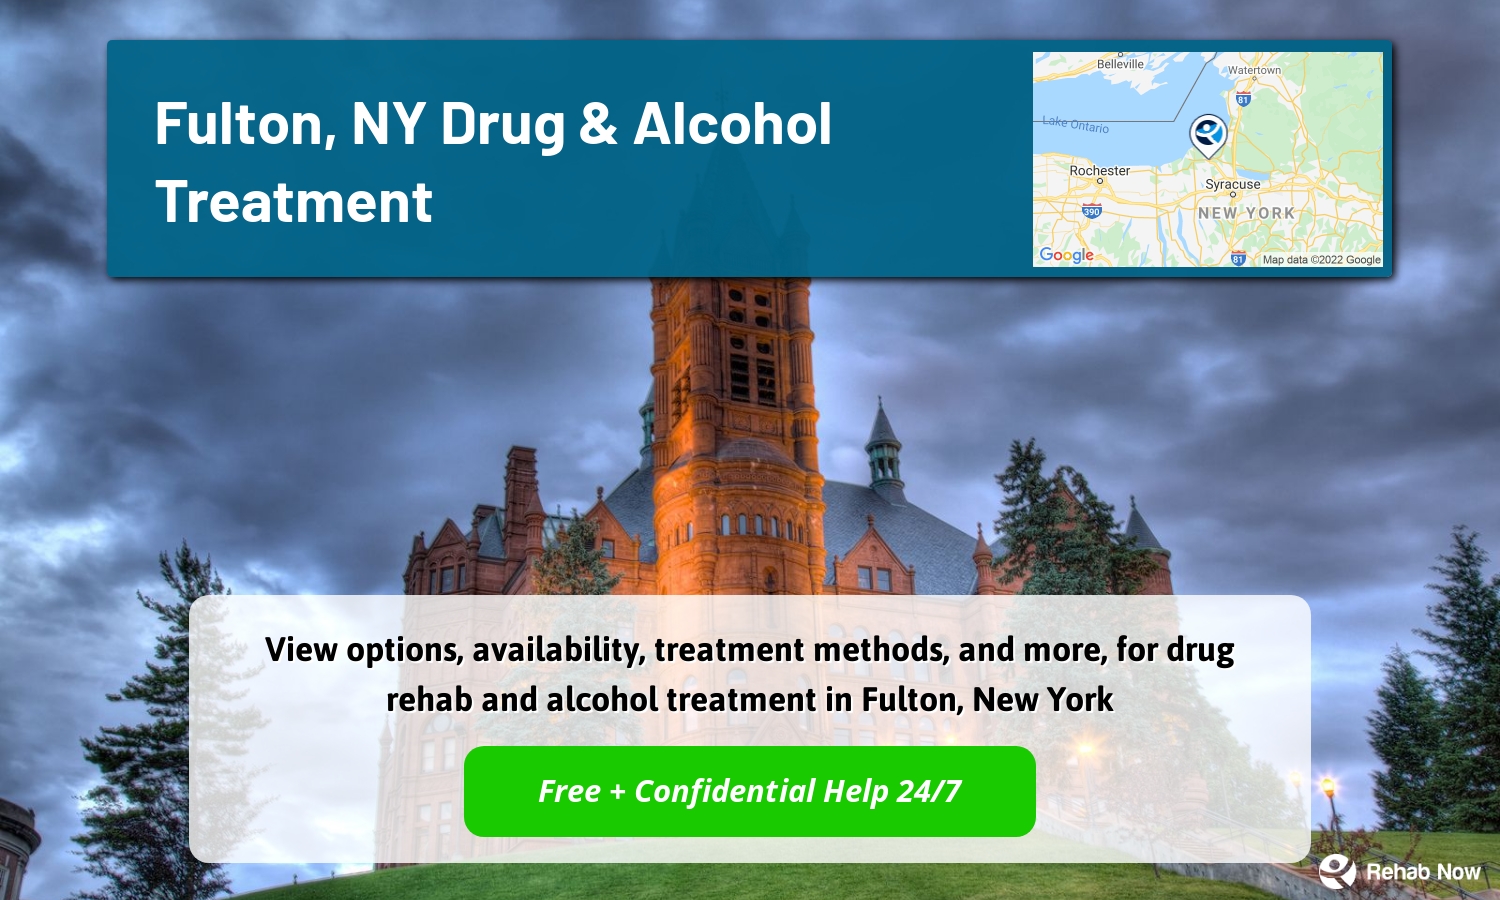 View options, availability, treatment methods, and more, for drug rehab and alcohol treatment in Fulton, New York